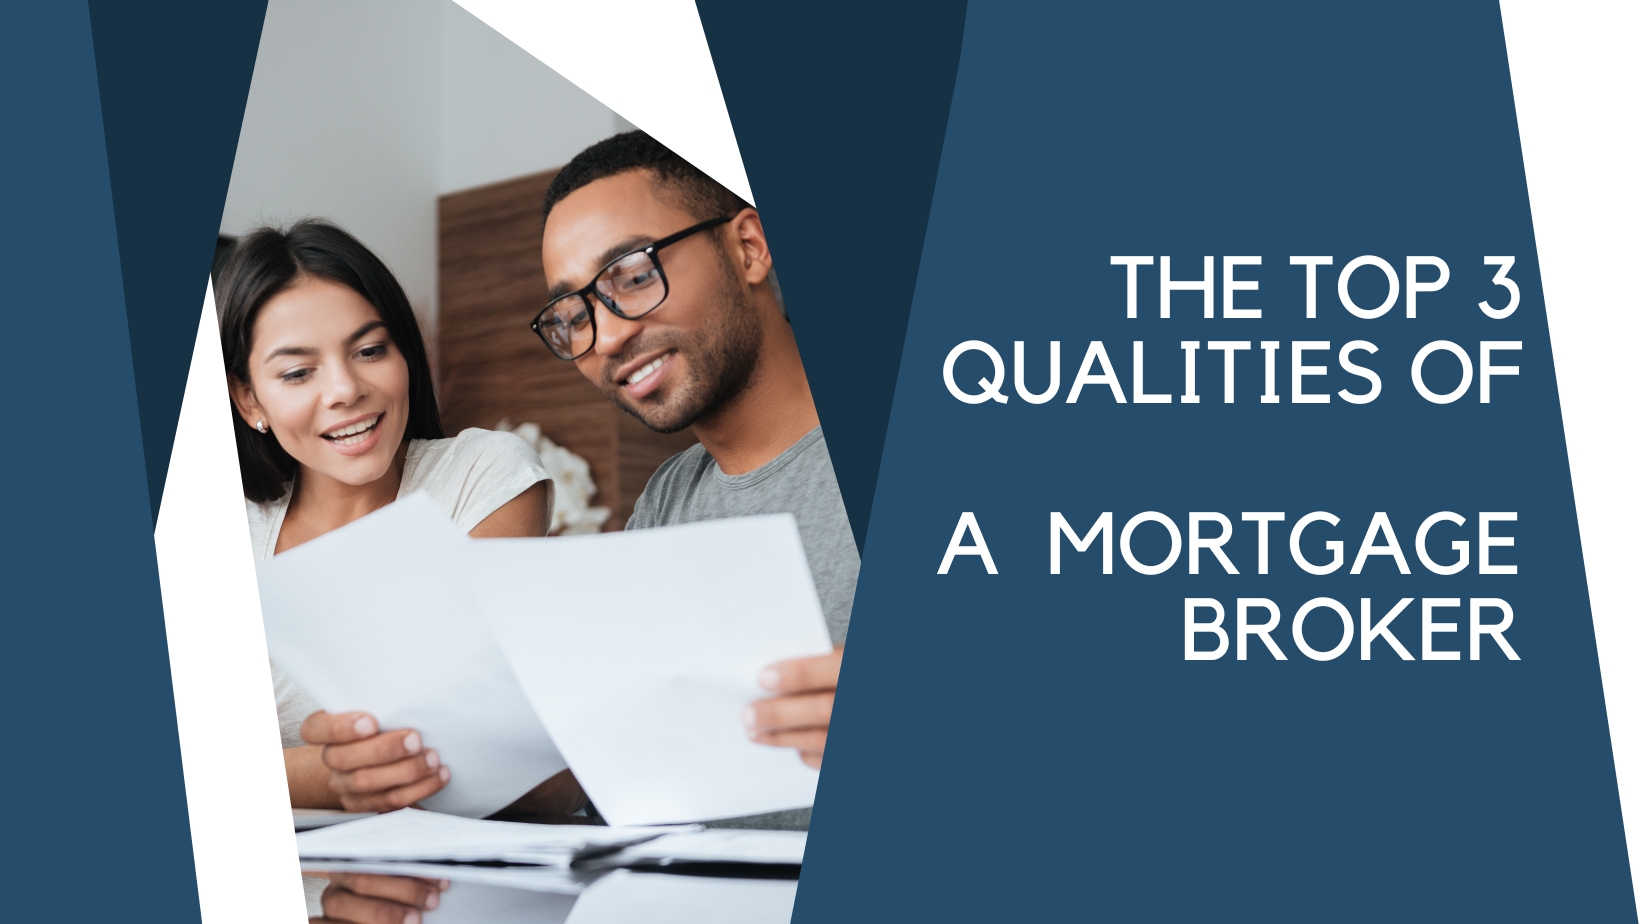 The Top 3 Qualities of a Mortgage Broker in Boise